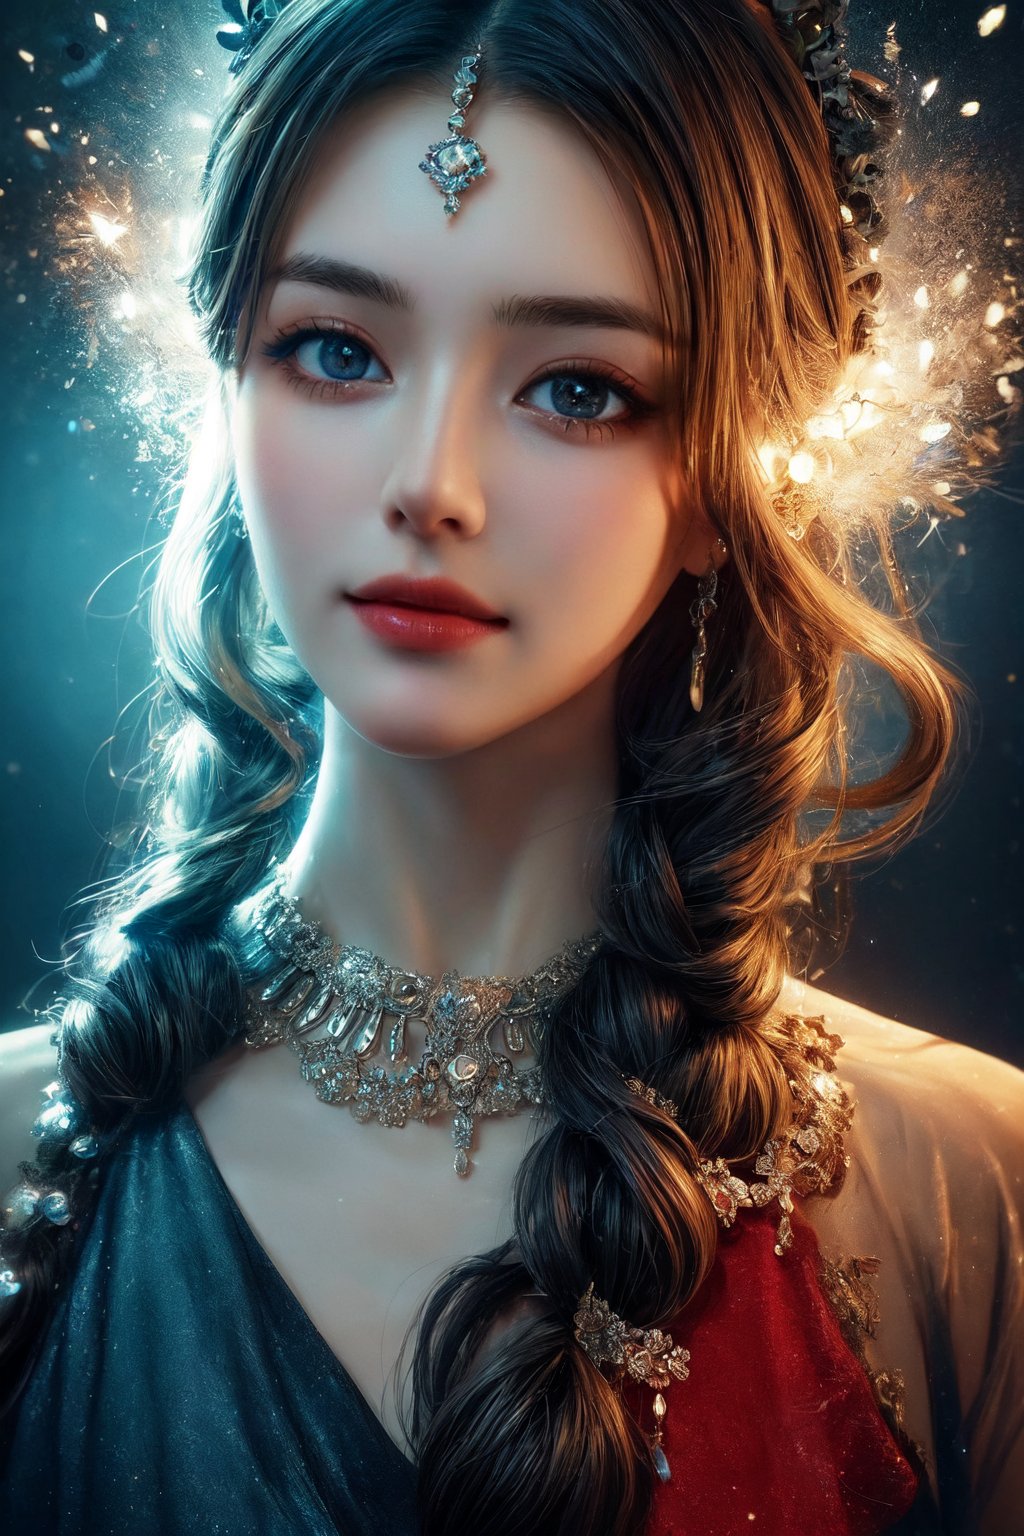 (masterpiece, high quality:1.5), 8K, HDR, 
1girl, well_defined_face, well_defined_eyes, ultra_detailed_eyes, ultra_detailed_face, by FuturEvoLab, 
ethereal lighting, immortal, elegant, porcelain skin, jet-black hair, waves, pale face, ice-blue eyes, blood-red lips, pinhole photograph, retro aesthetic, monochromatic backdrop, mysterious, enigmatic, timeless allure, the siren of the night, secrets, longing, hidden dangers, captivating, nostalgia, timeless fascination, Edge feathering and holy light, 